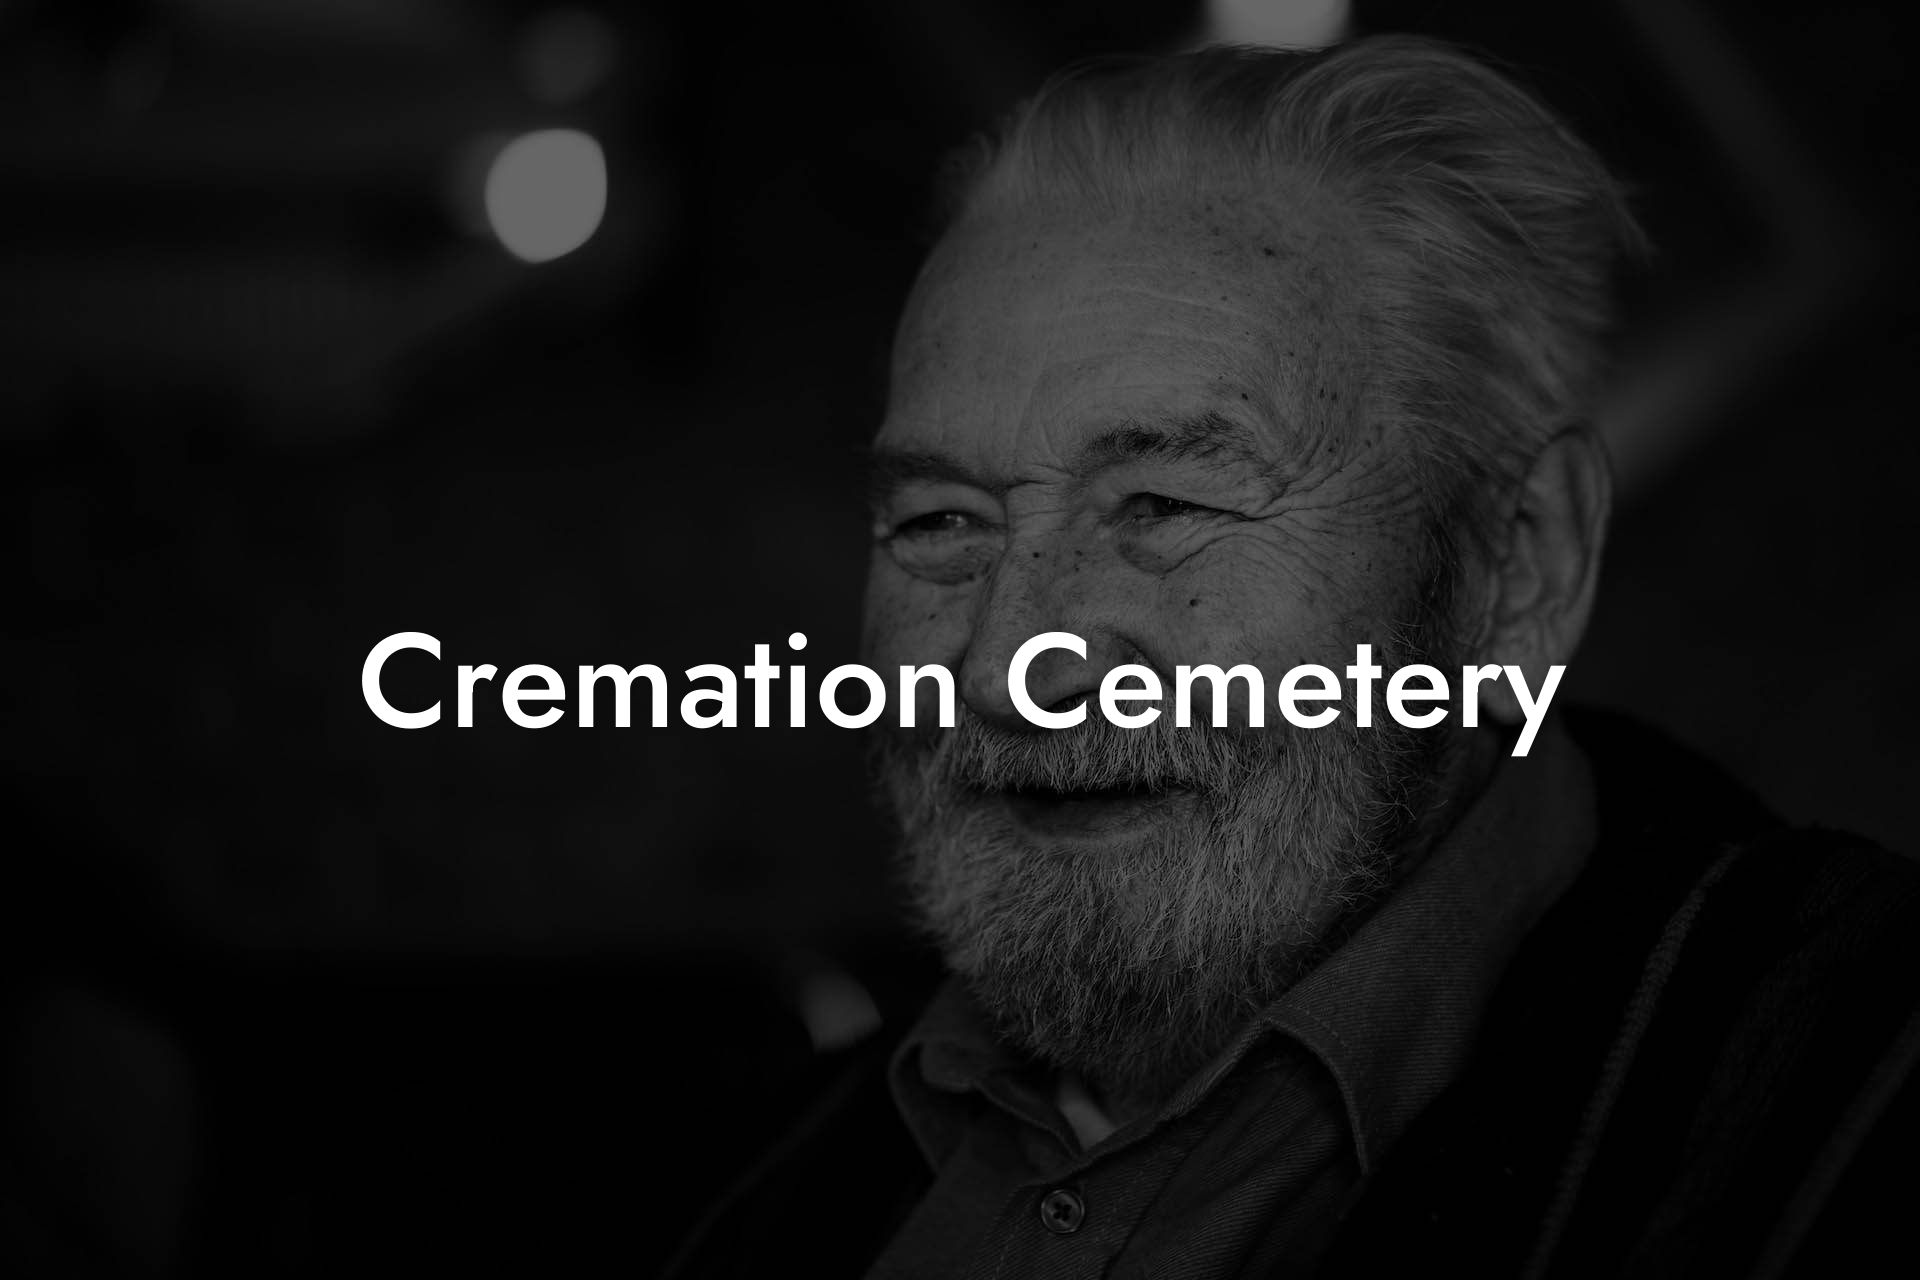 Cremation Cemetery